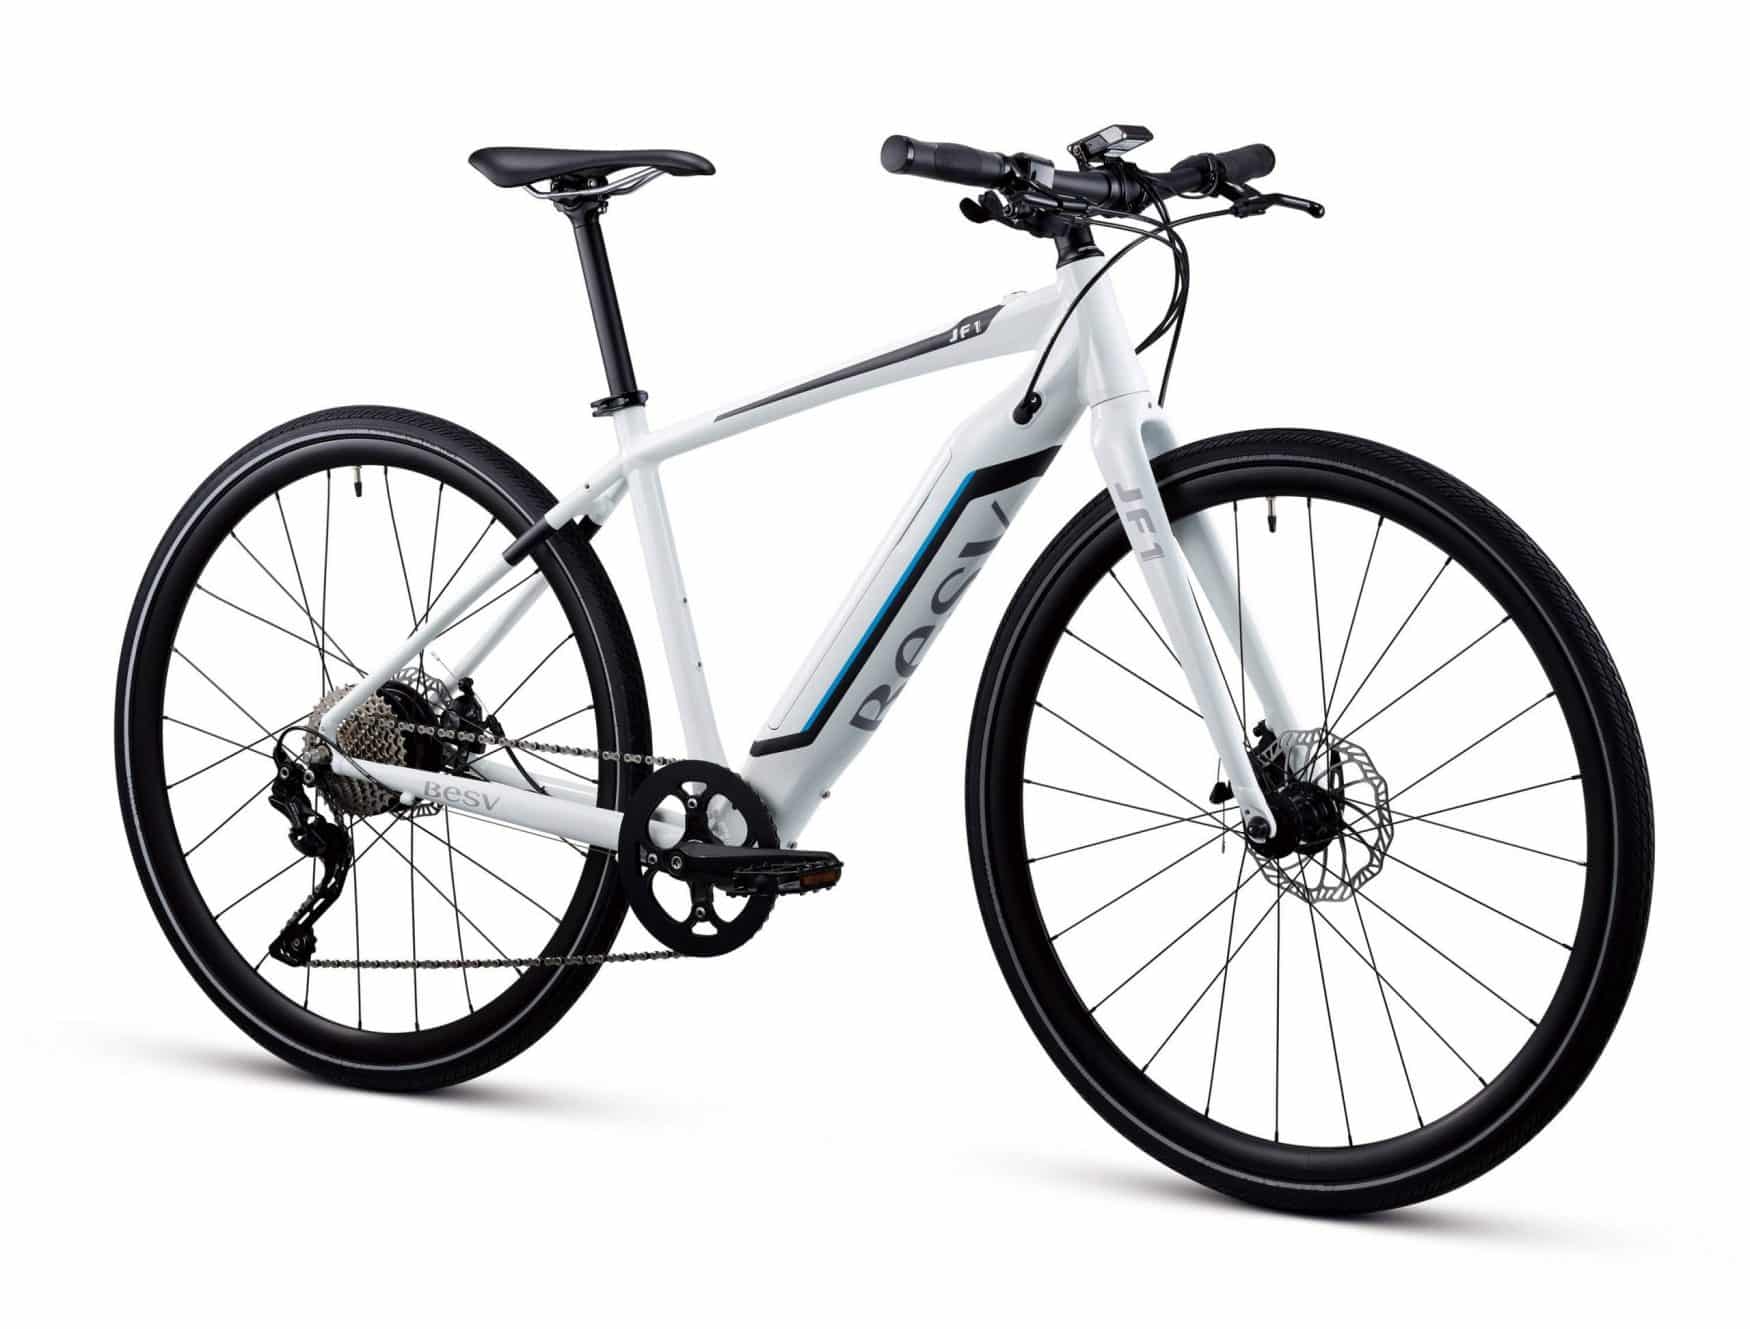 JF 1 MY21 Innovative and Reliable E-Bike | BESV